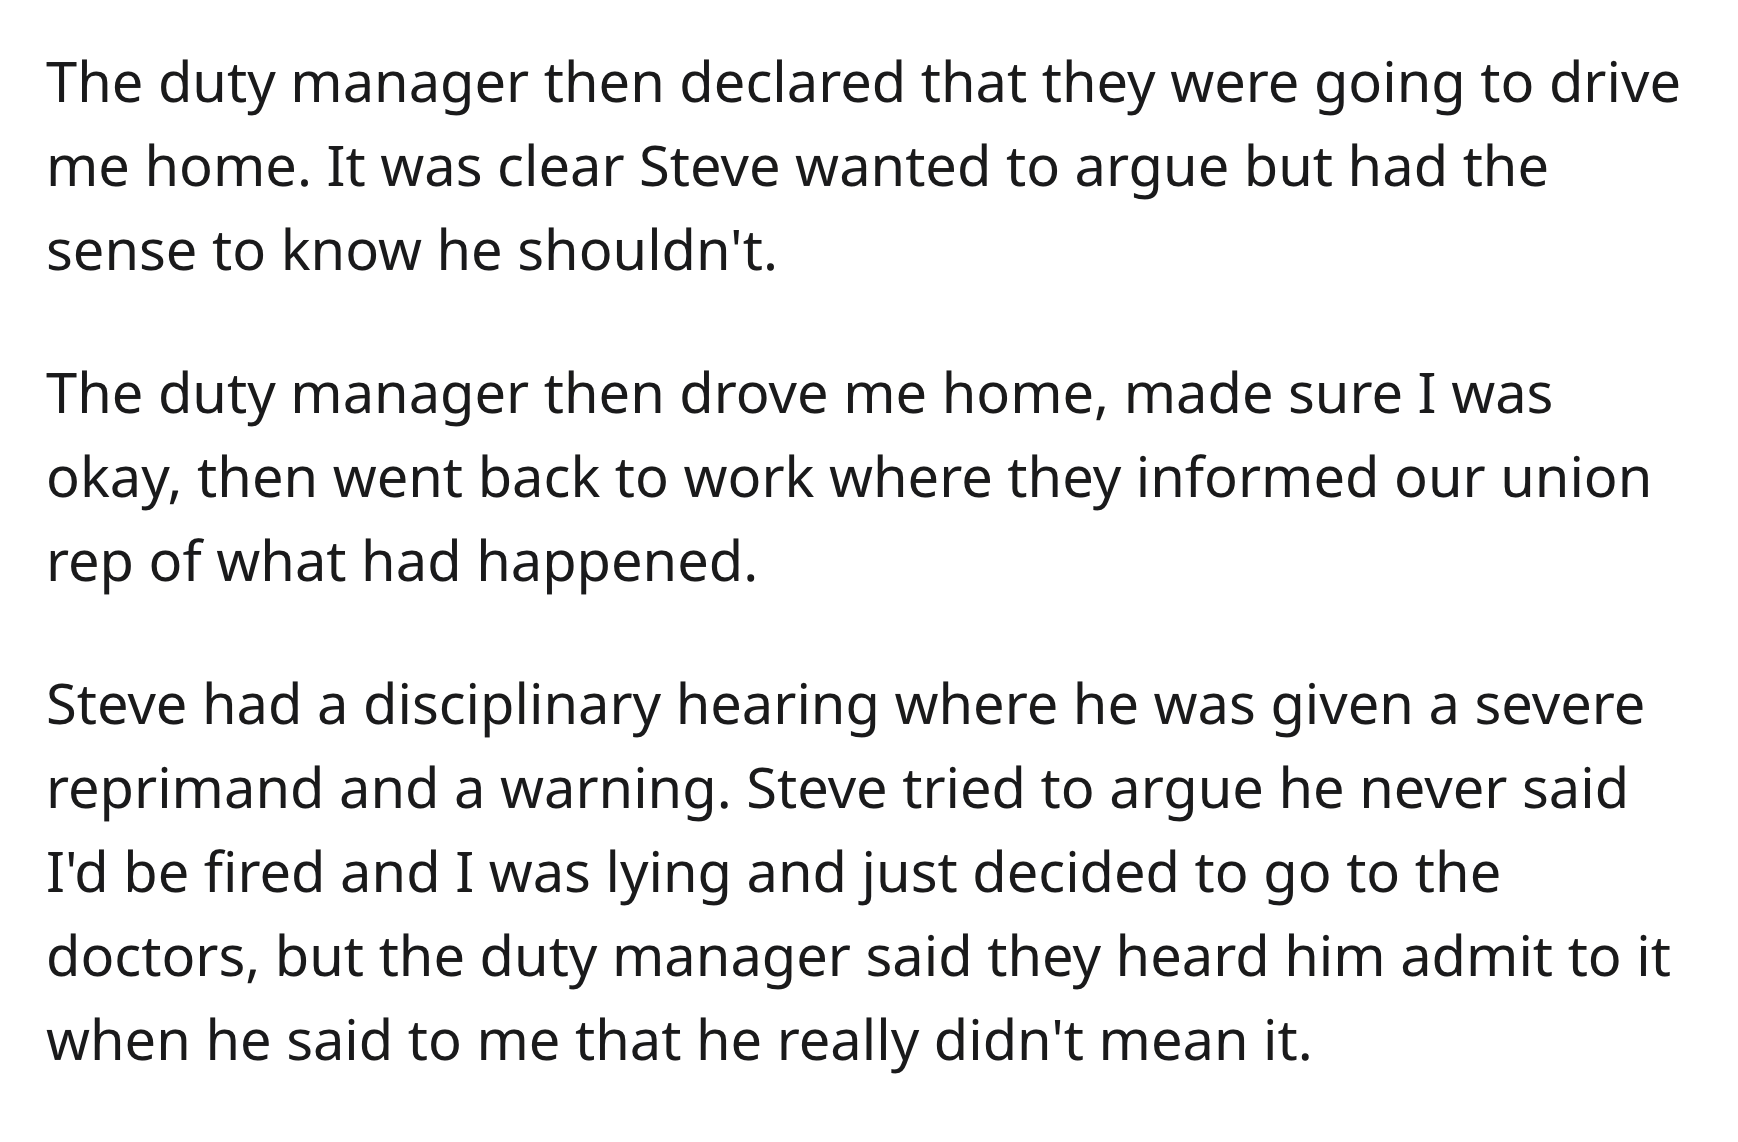 Boss Illegally Demands Doctor’s Note, So Doctor Recommends 2 Weeks Off - Organism - The duty manager then declared that they were going to drive me home. It was clear Steve wanted to argue but had the sense to know he shouldn't. The duty manager then drov